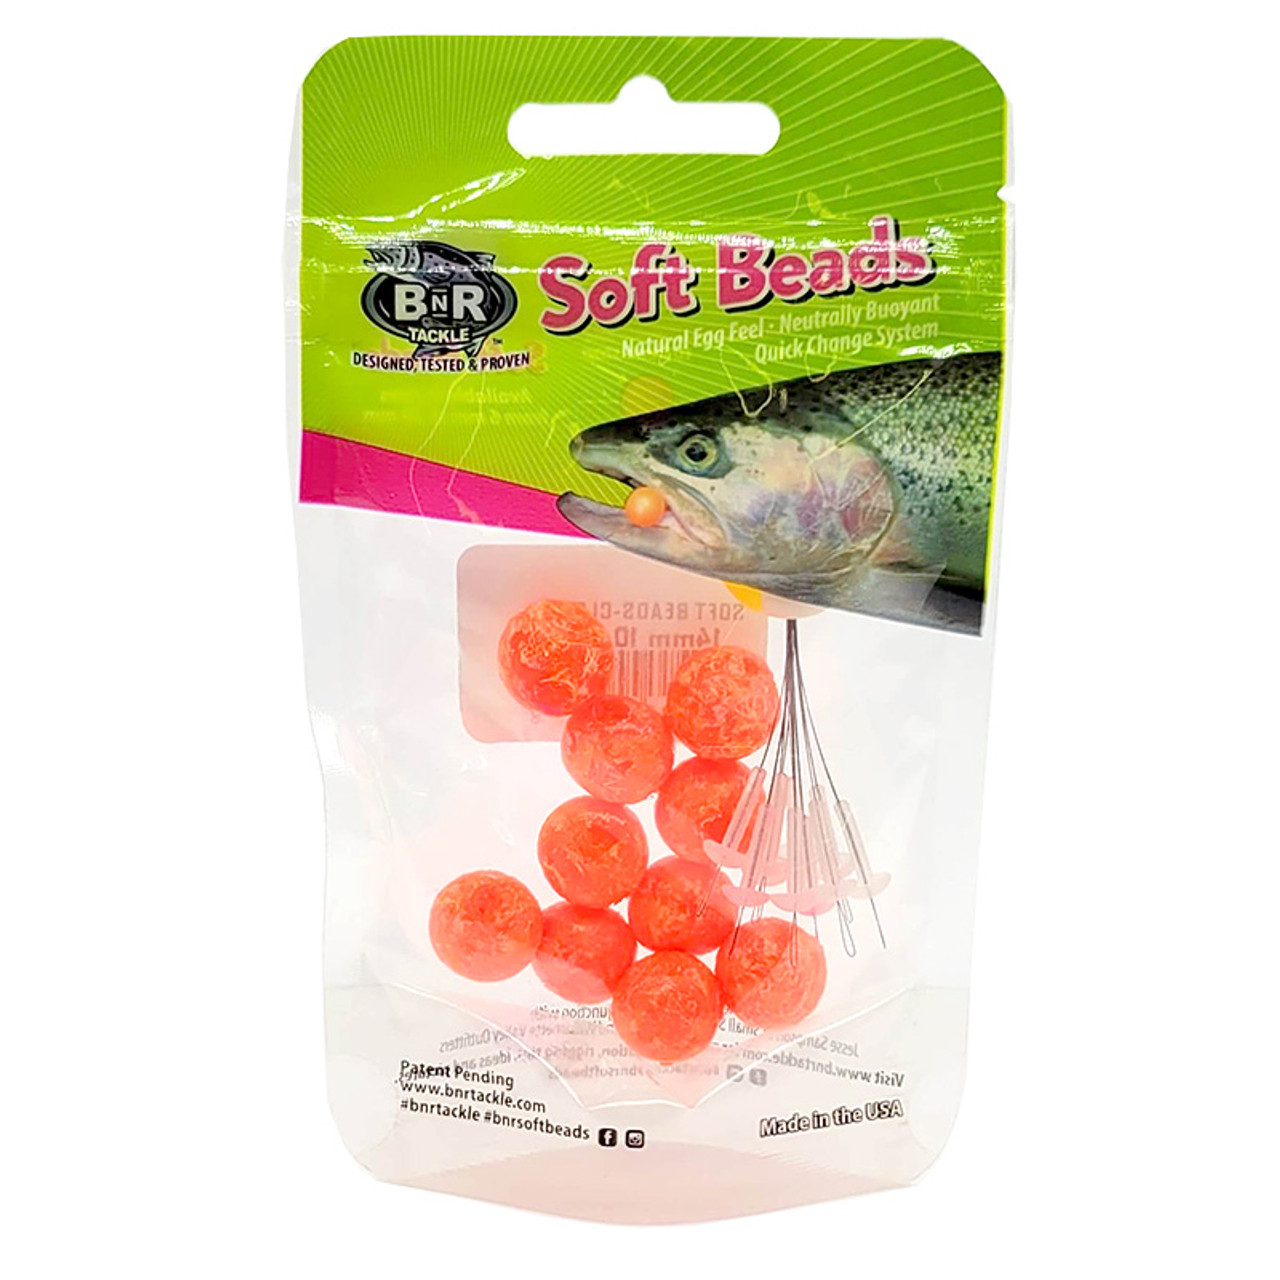 8mm Soft Beads by BnR Tackle